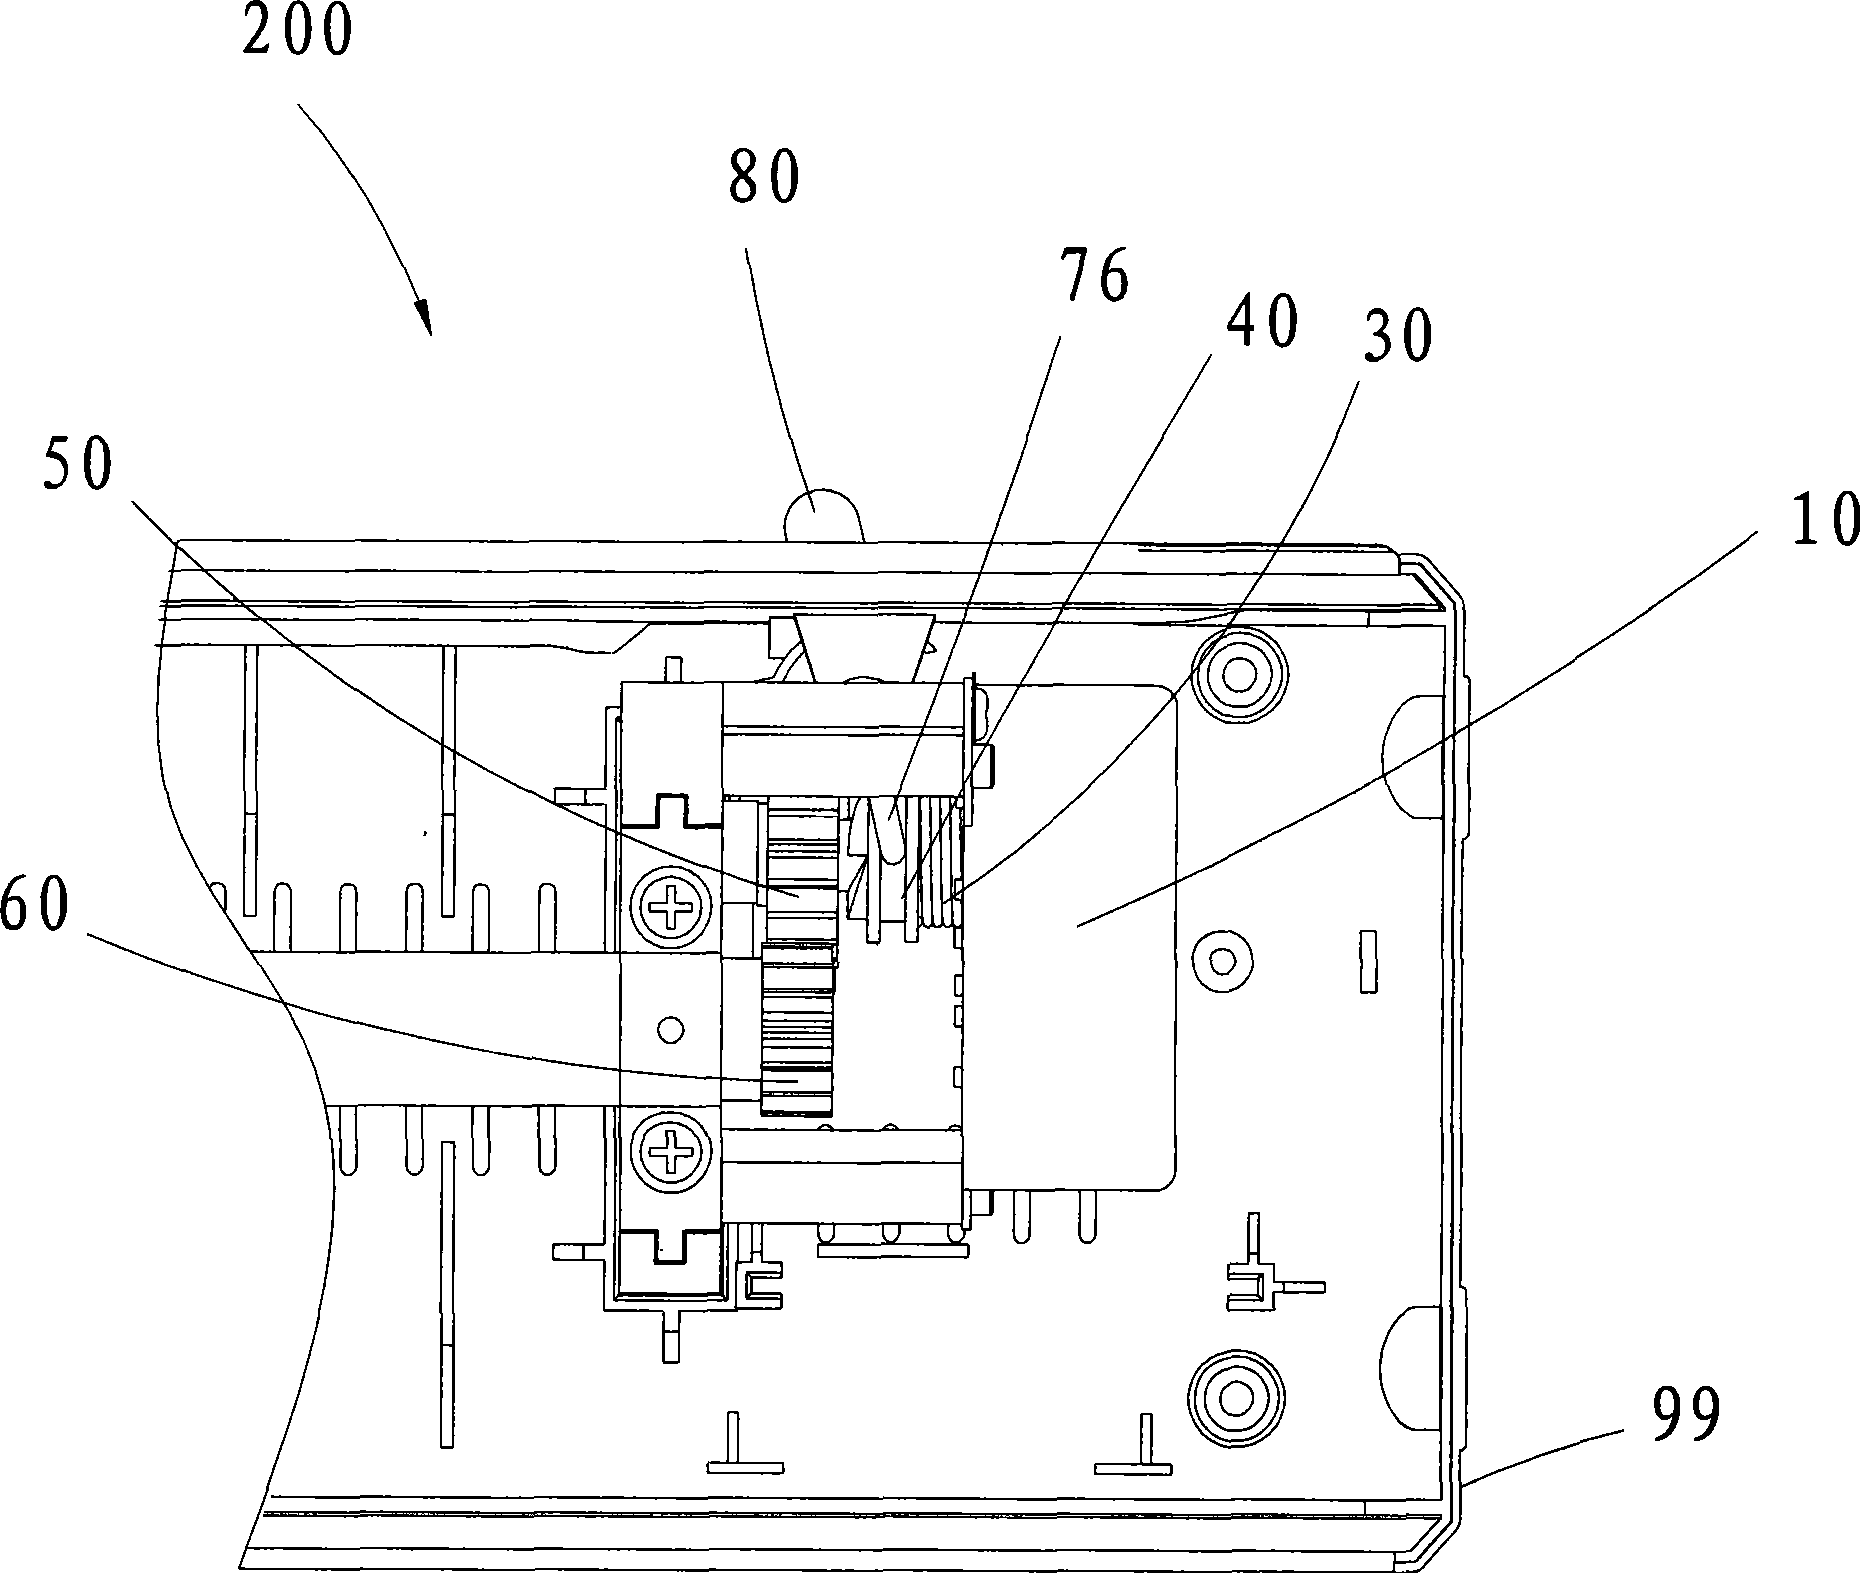 Engaging and disengaging gear and gluing machine using the same